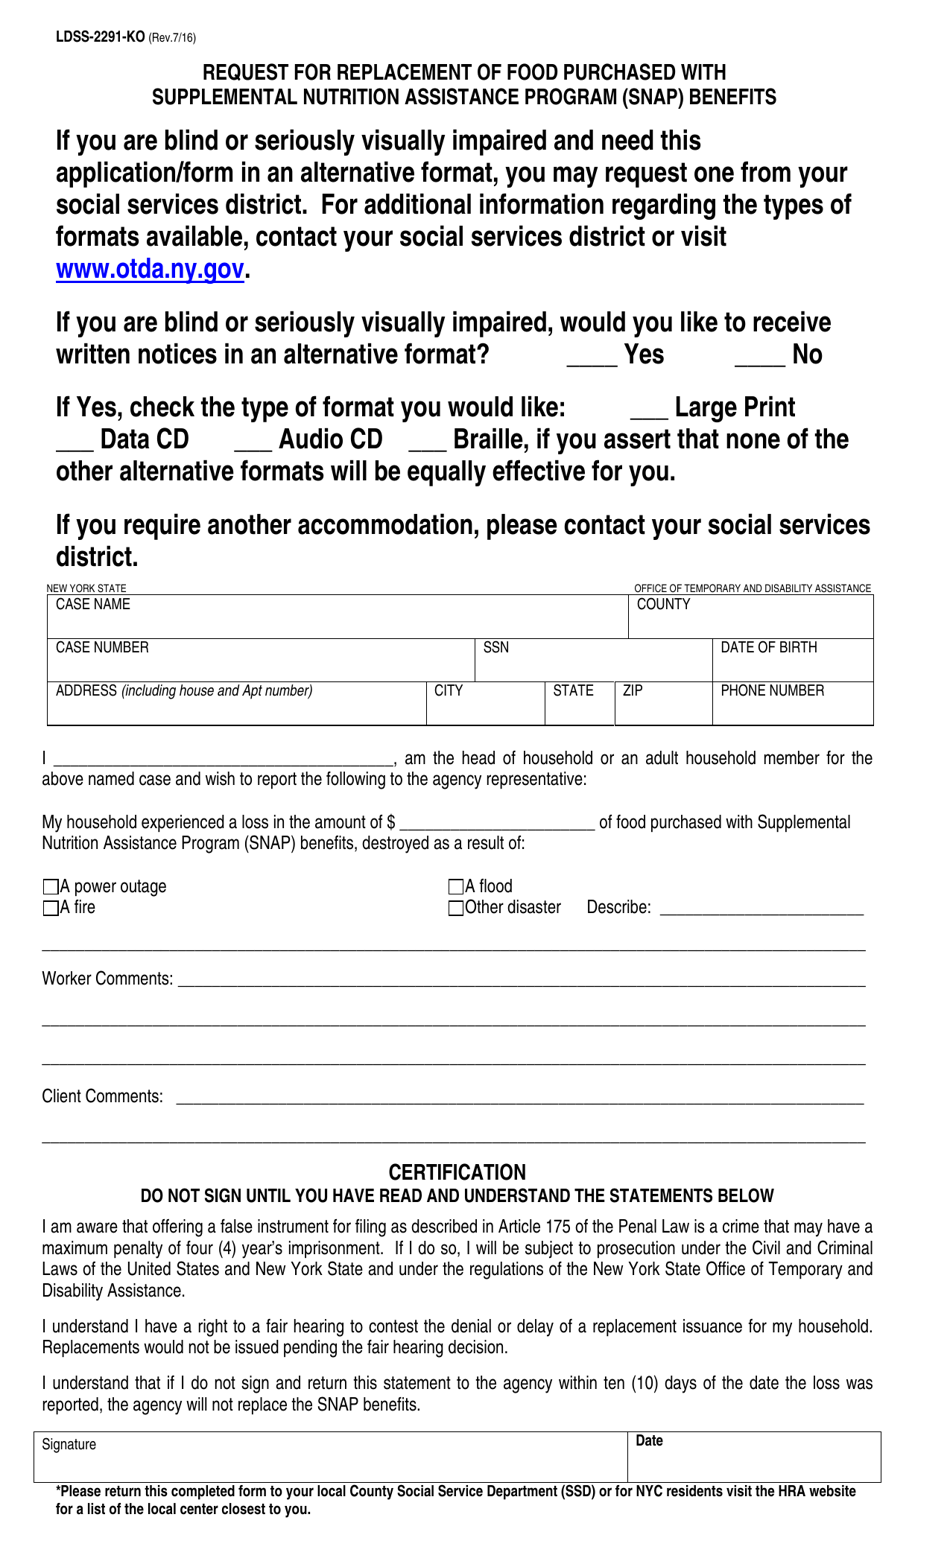 Form LDSS-2291 Request for Replacement of Food Purchased With Supplemental Nutrition Assistance Program (Snap) Benefits - New York (English / Korean), Page 1